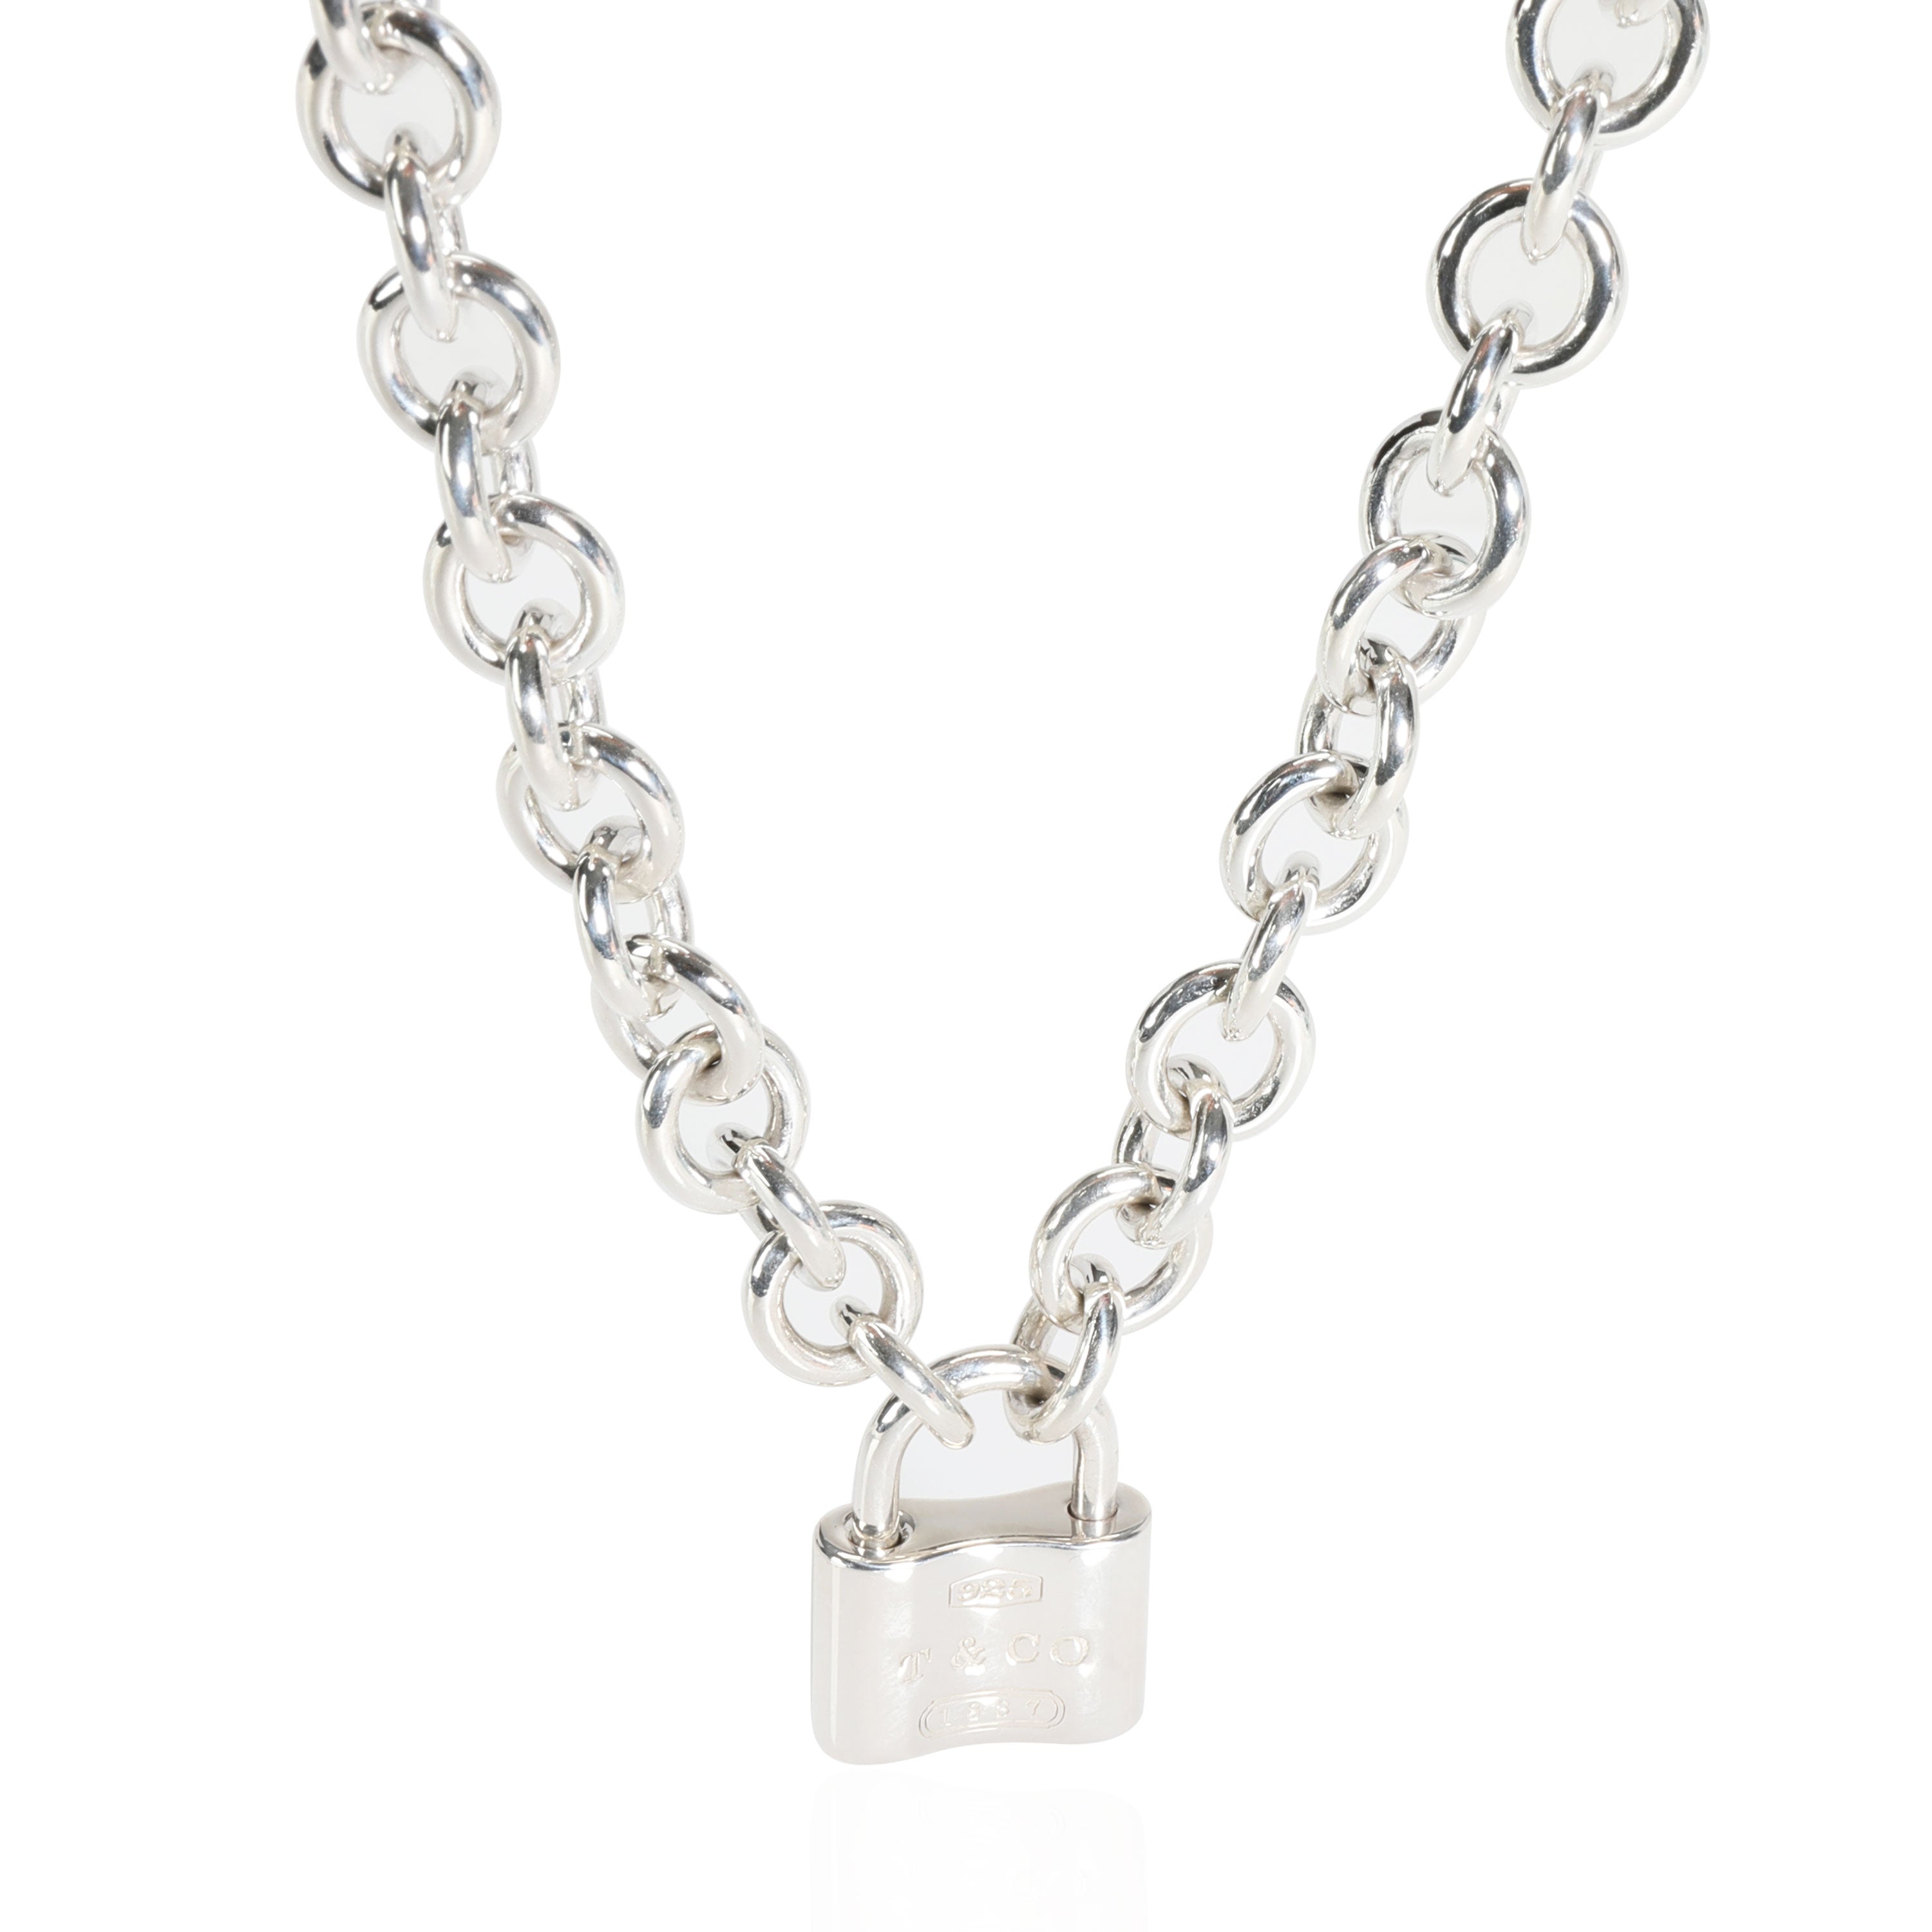 Tiffany & Co. 1837 Lock Necklace in Sterling Silver